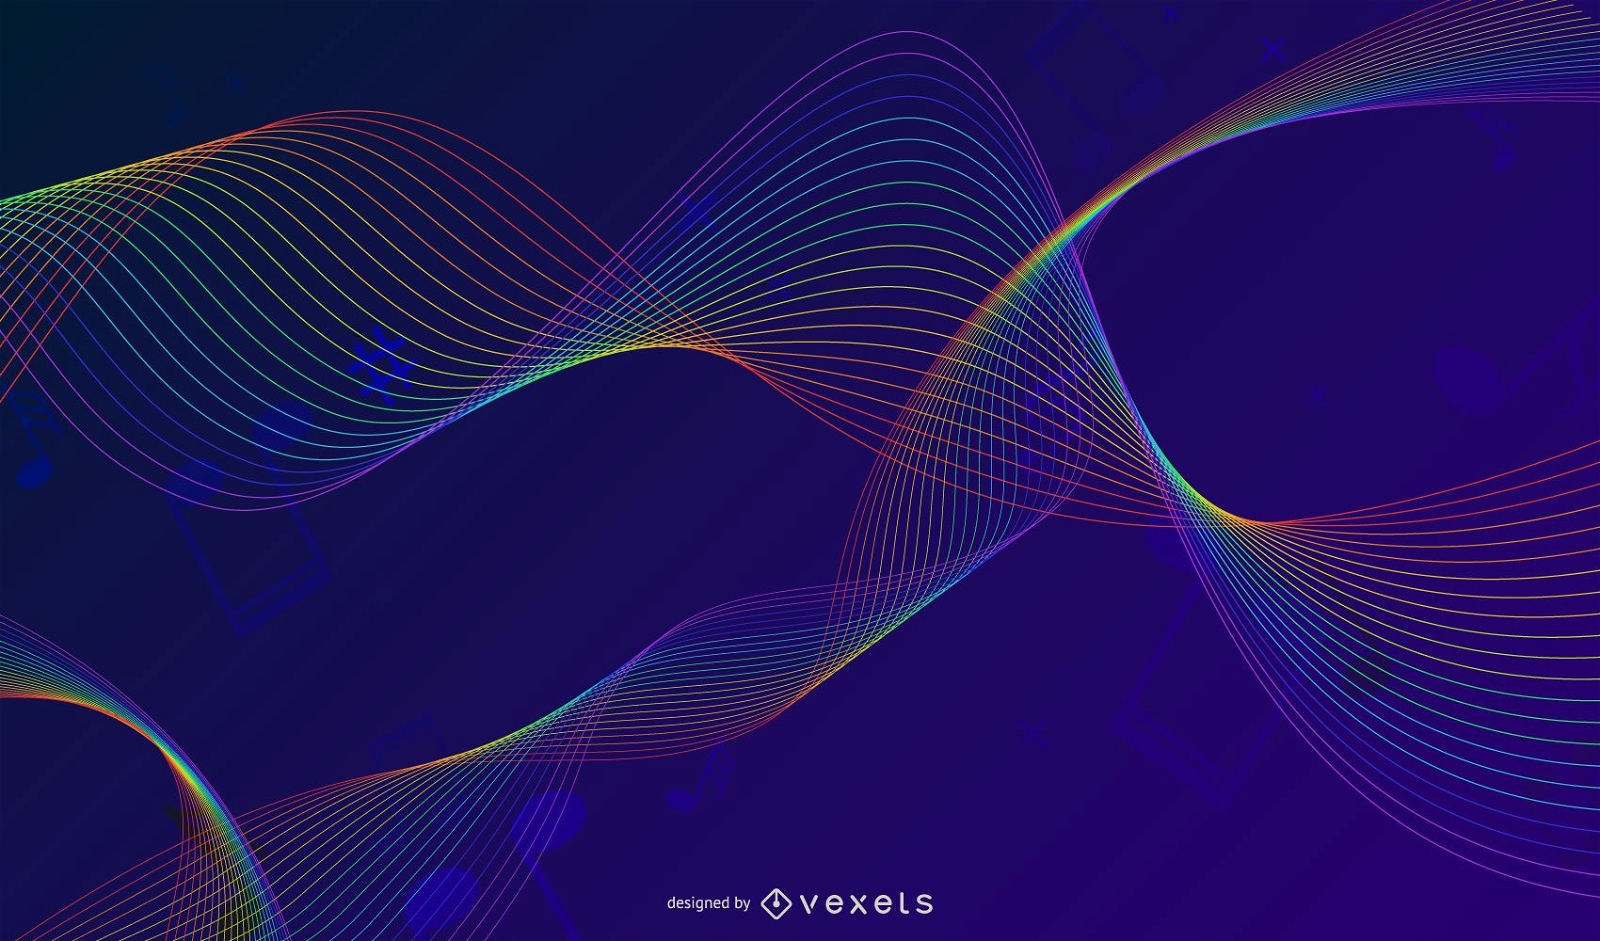 Abstract Colorful Music Background Vector Illustration